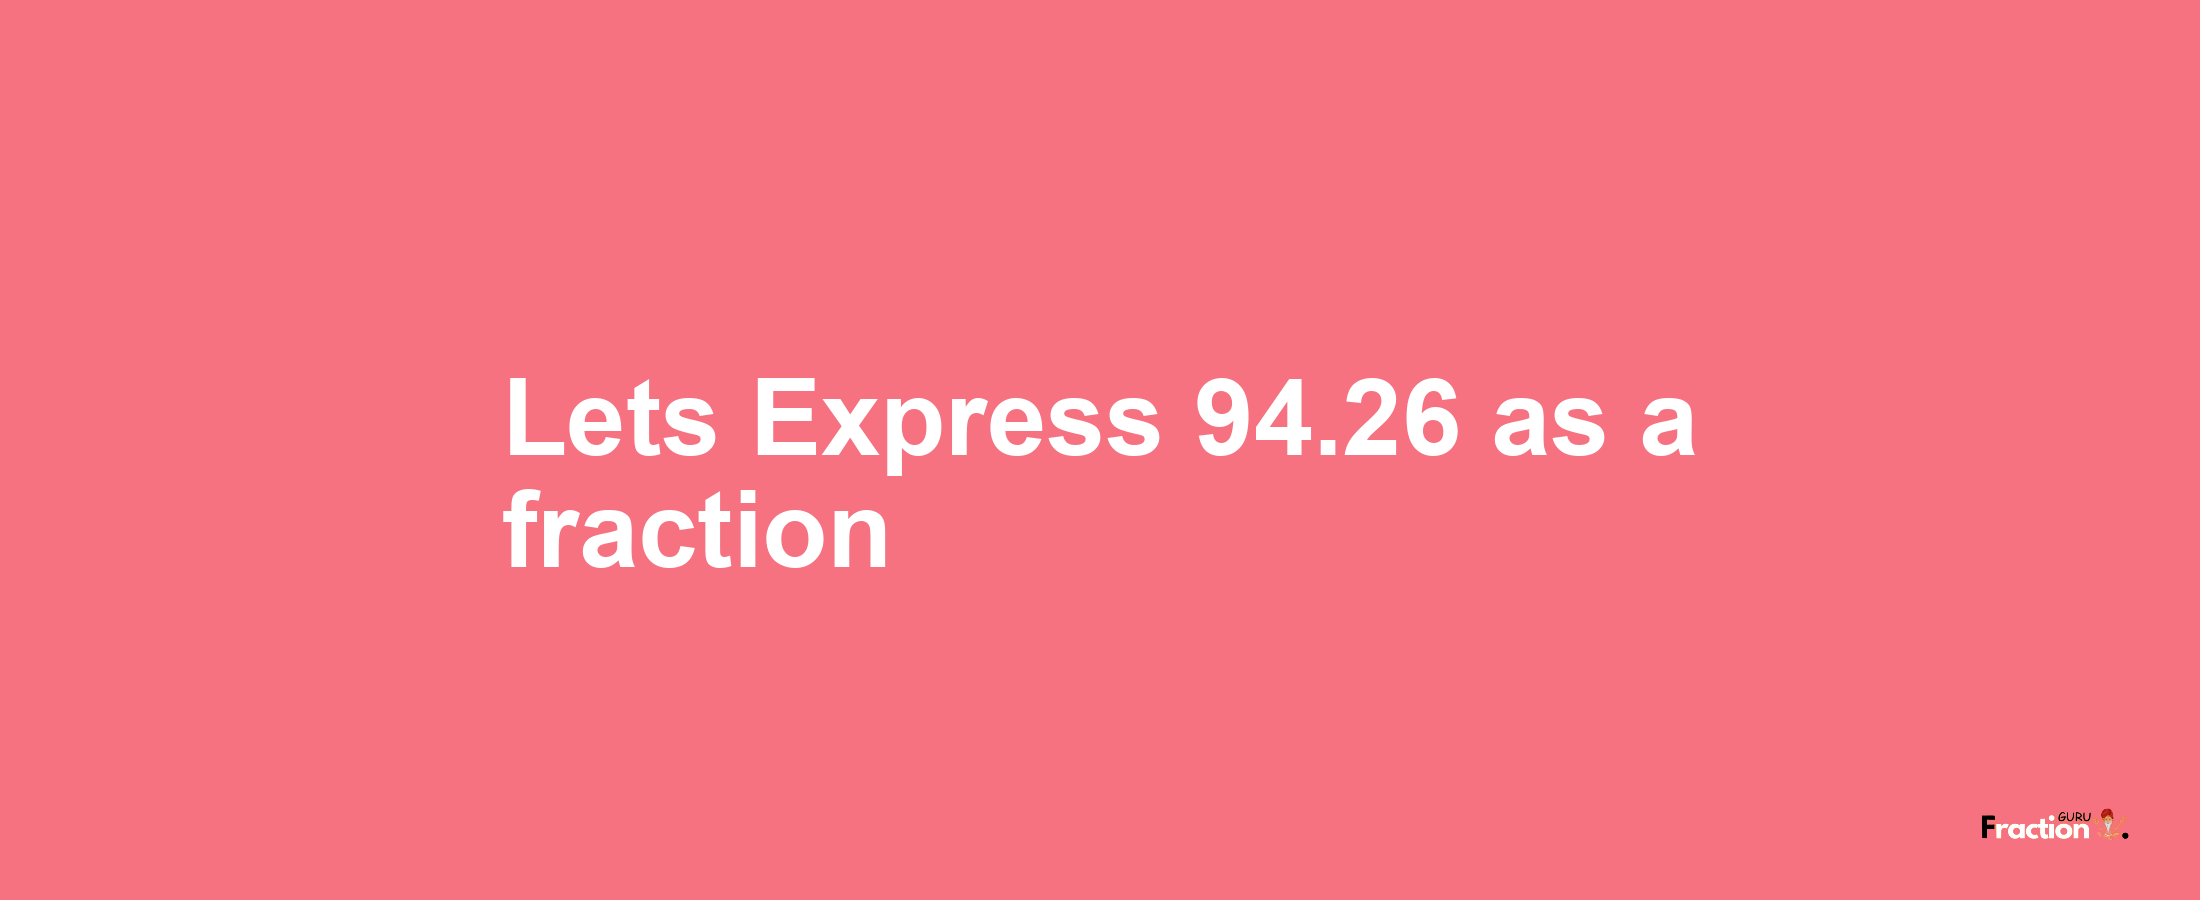 Lets Express 94.26 as afraction